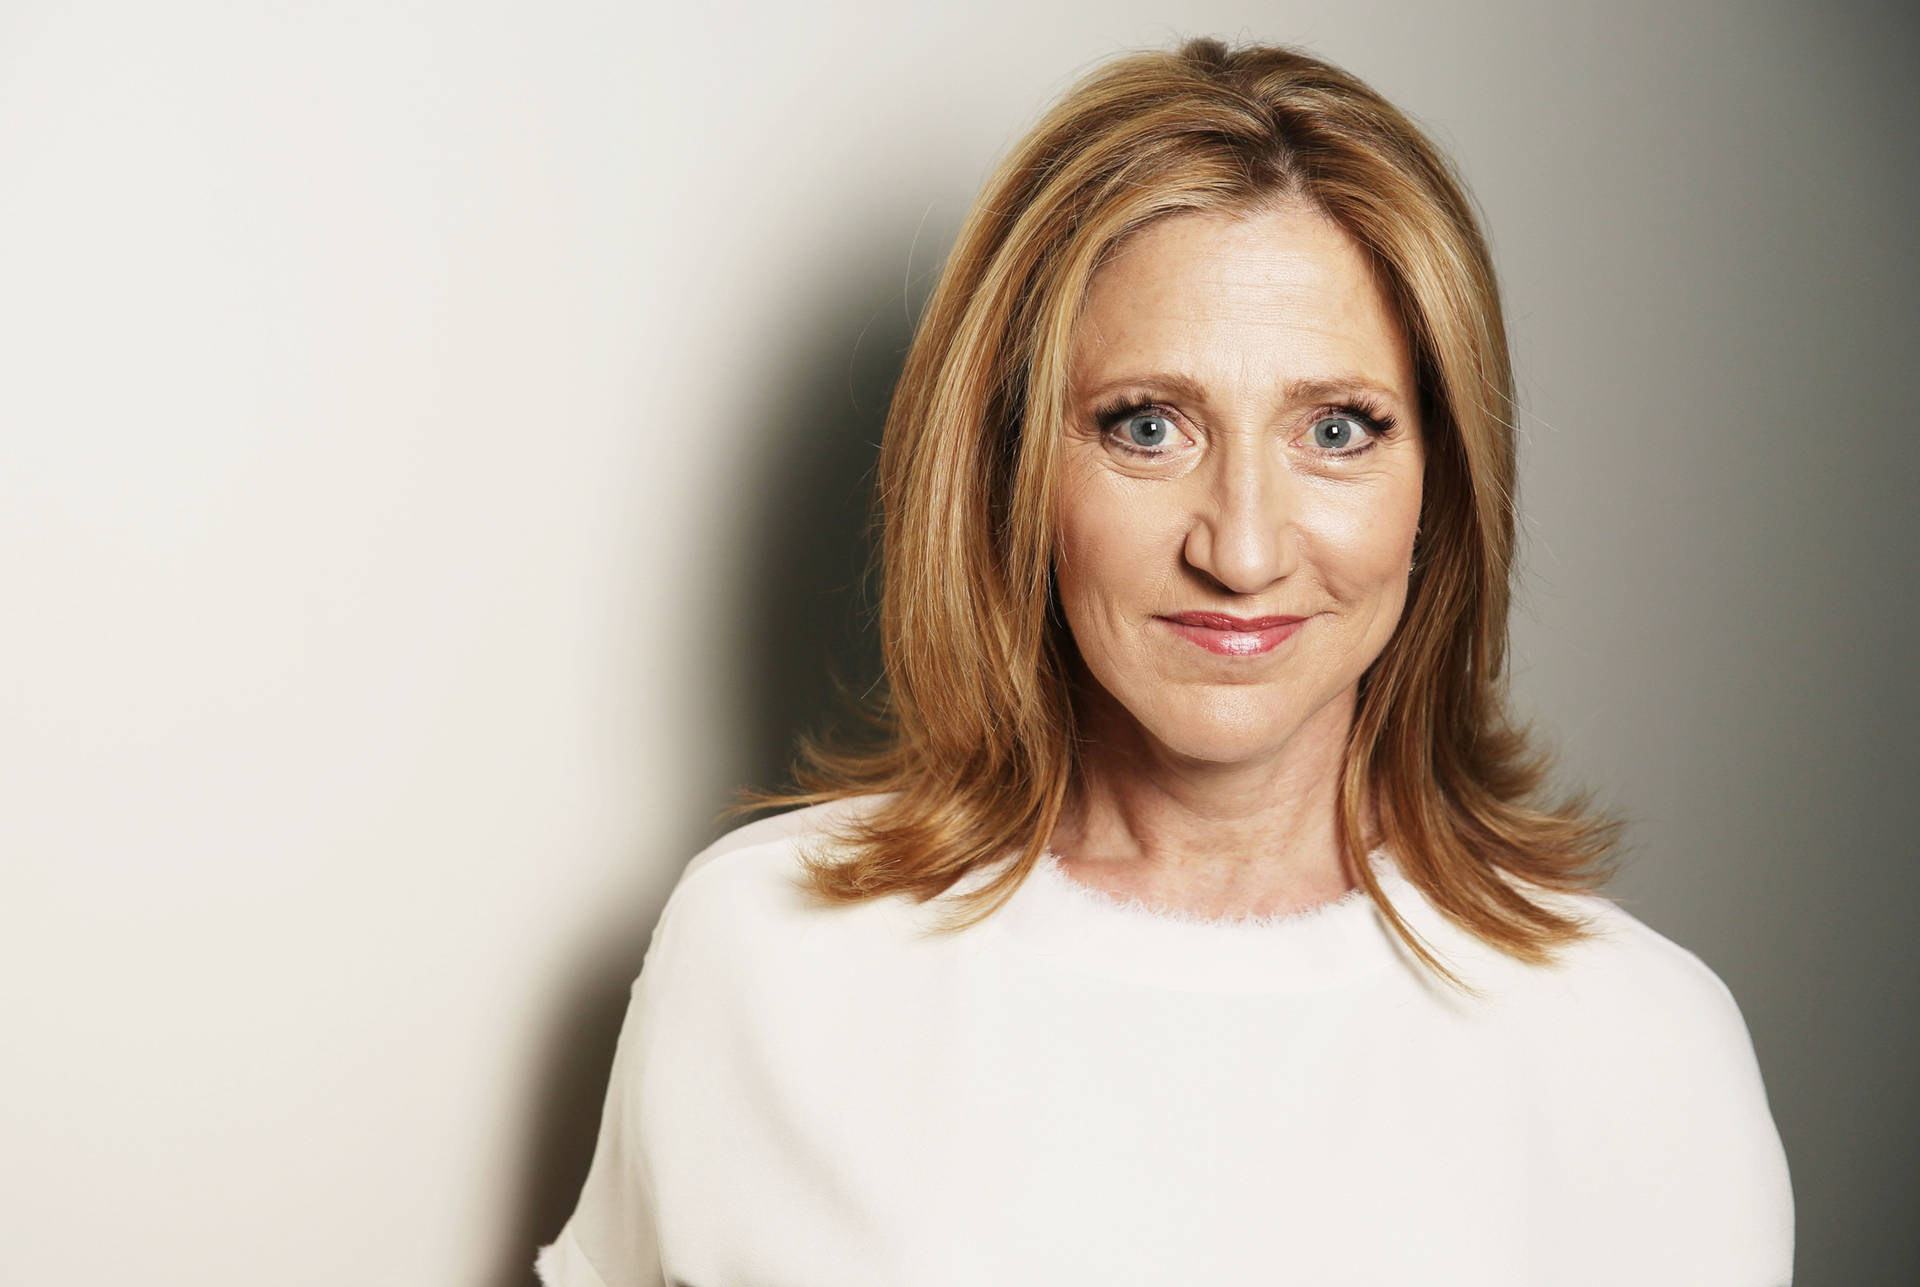 Ediefalco I En Vanlig Vit Topp. (this Sentence Could Be Used To Describe A Wallpaper Featuring An Image Of Edie Falco Wearing A Plain White Top.) Wallpaper